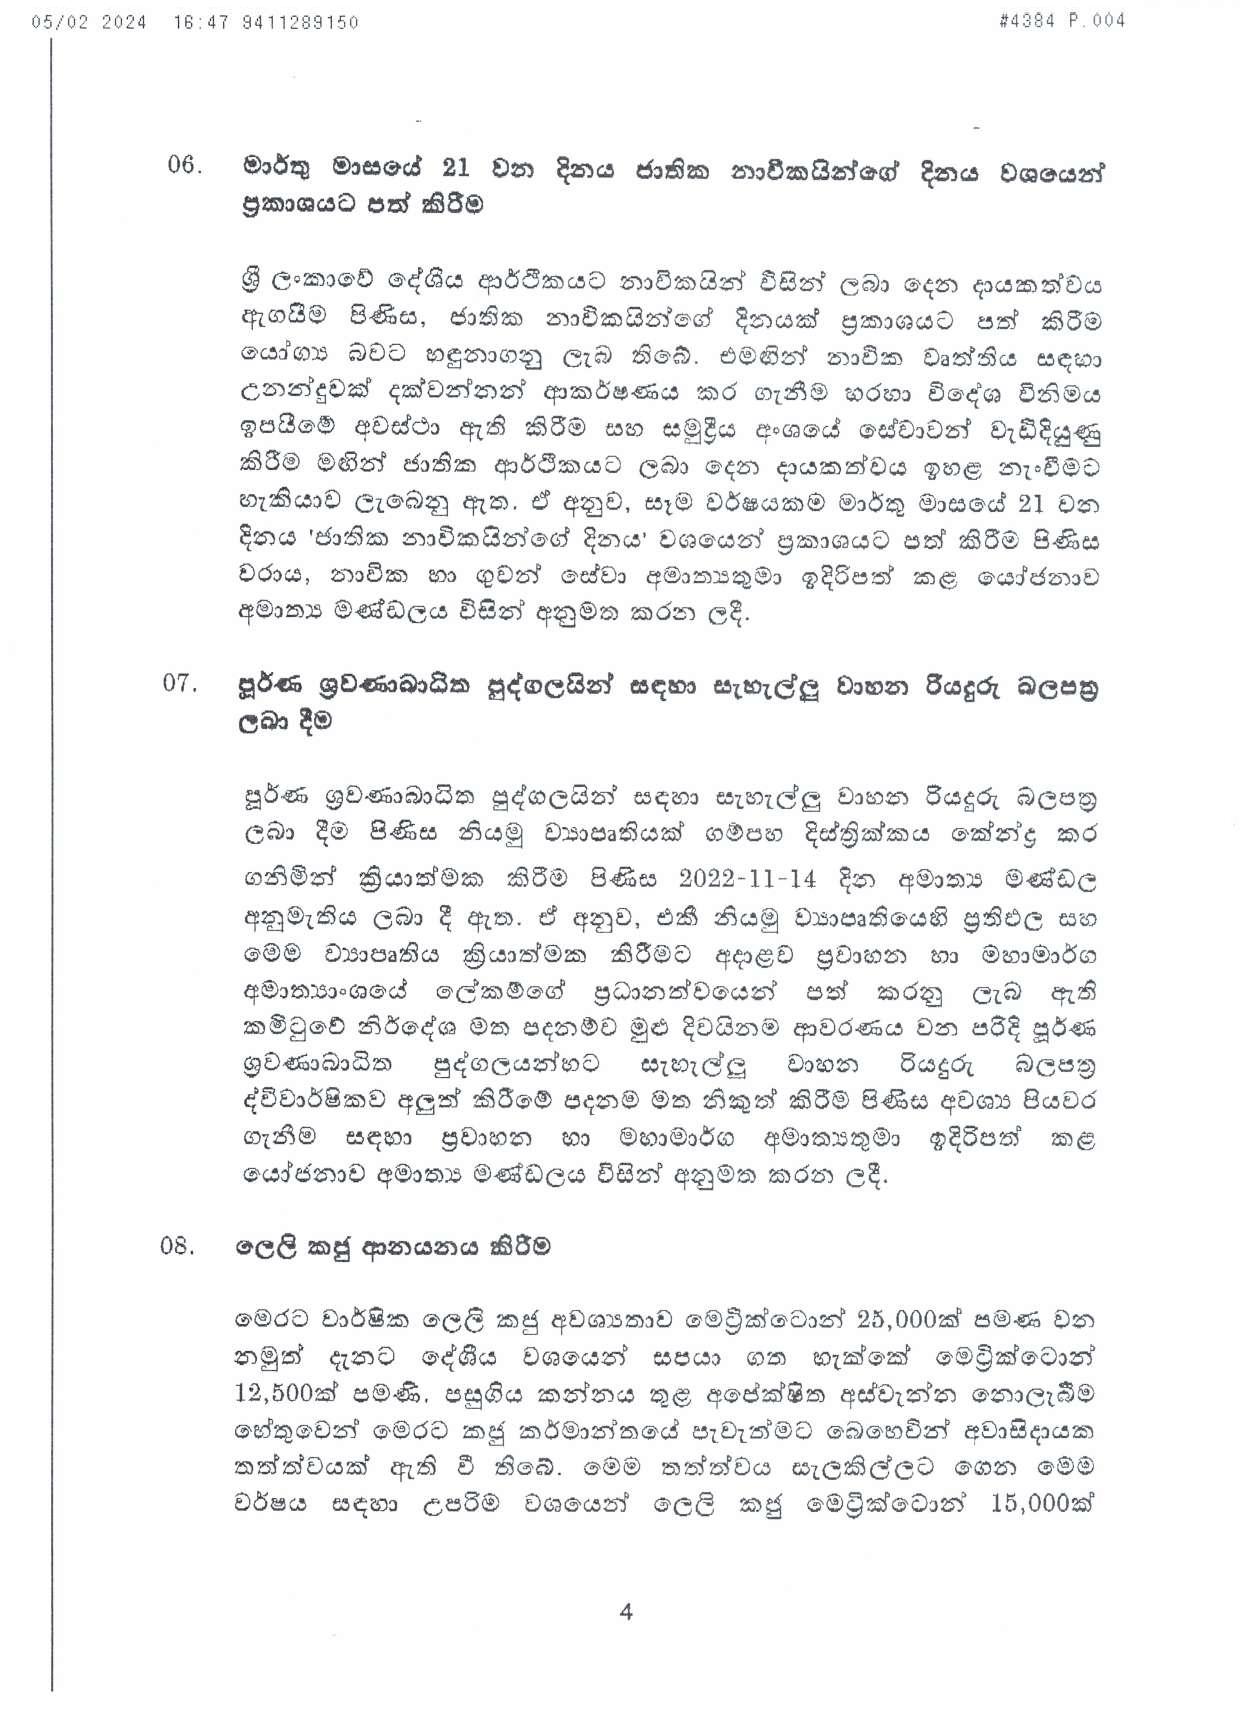 Cabinet Decision on 05.02.2024 page 004